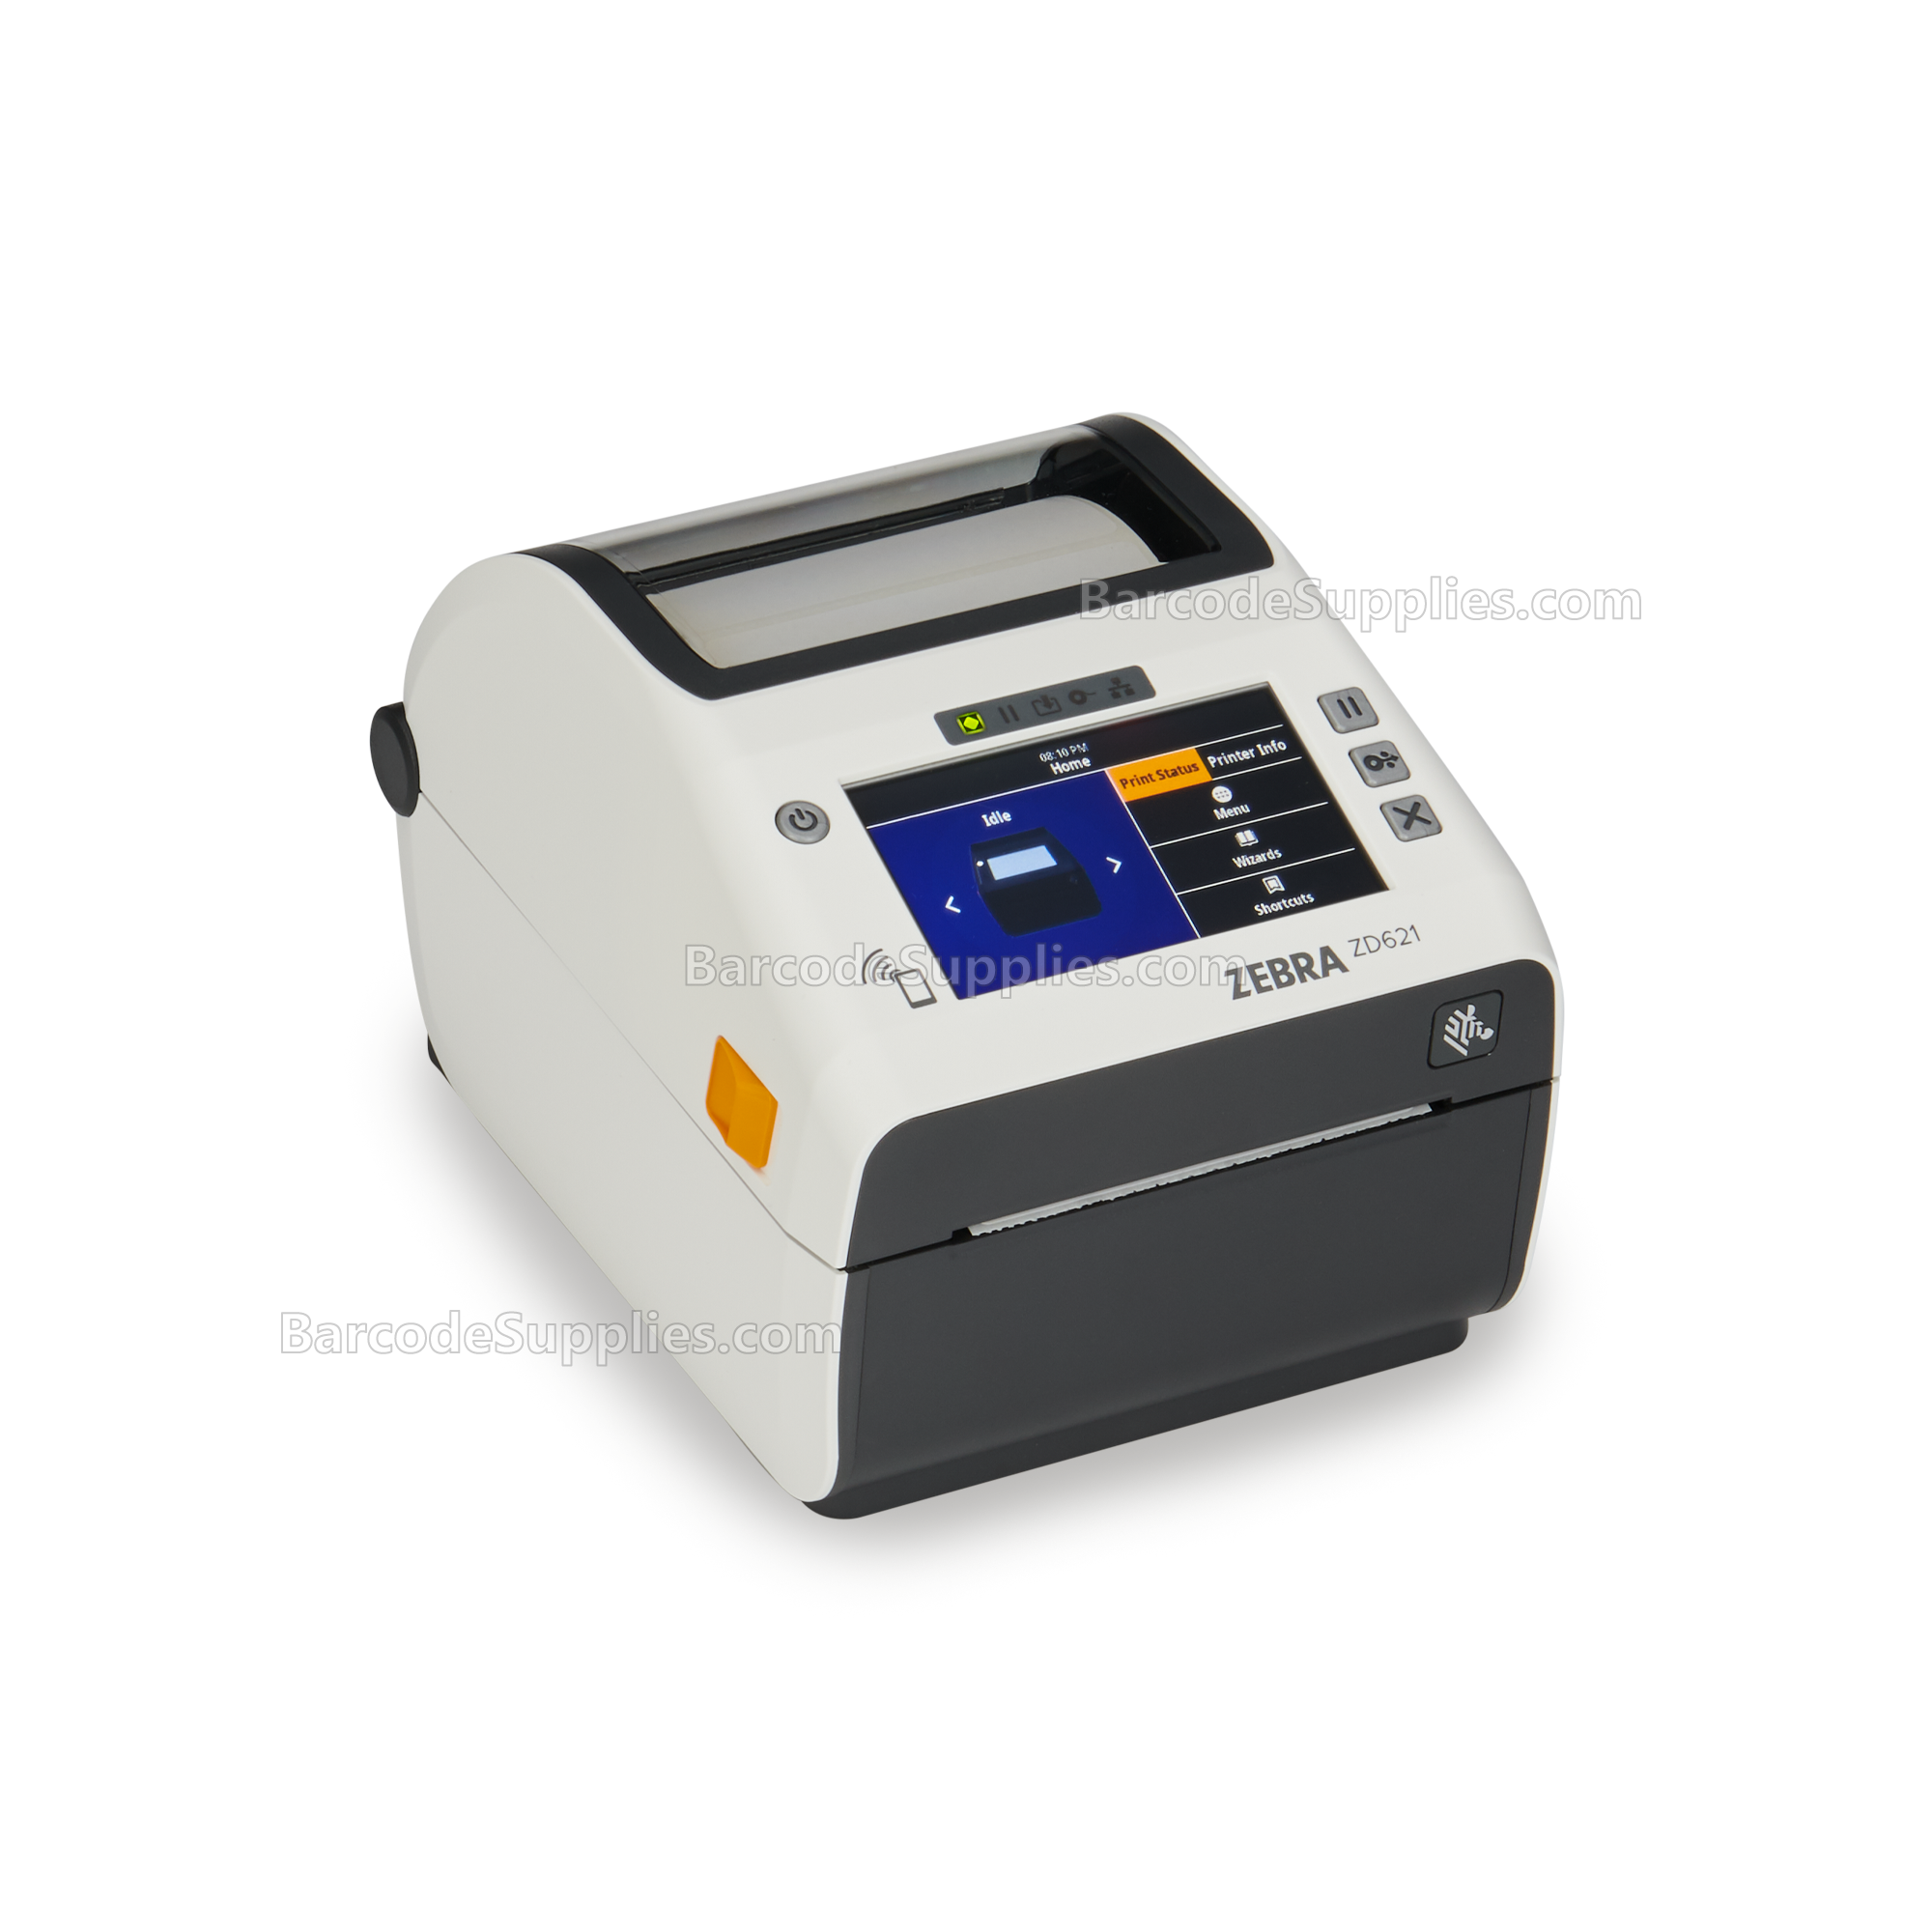 Zebra Direct Thermal Printer ZD621; Healthcare, Color Touch LCD; 300 dpi, USB, USB Host, Ethernet, Serial, 802.11ac, BT4, USA/Canada, US Cord, Swiss Font, EZPL